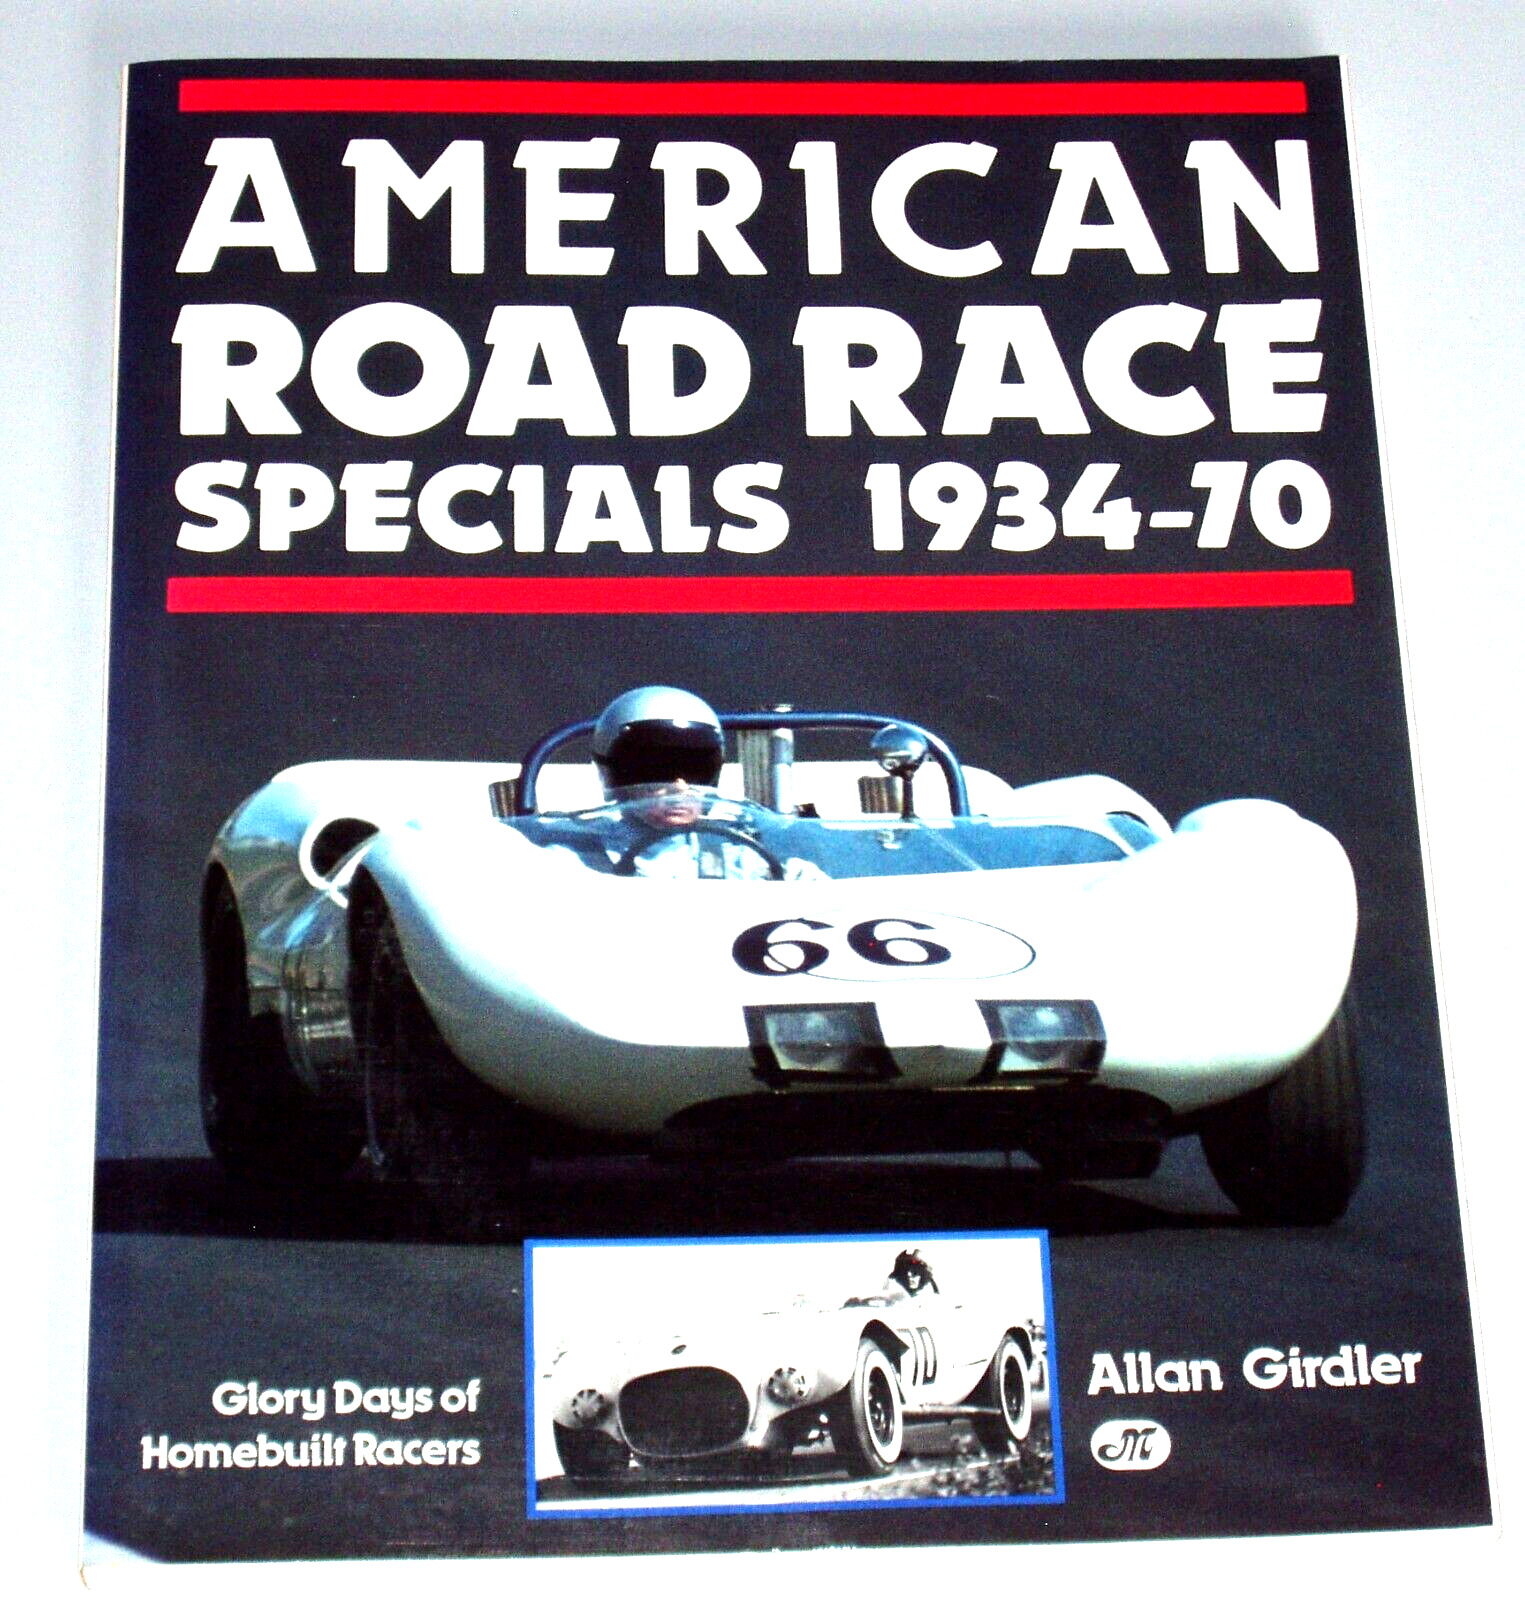 AMERICAN ROAD RACE SPECIALS 1934-70 by Allan Girdler - 1990 First Edition - NICE